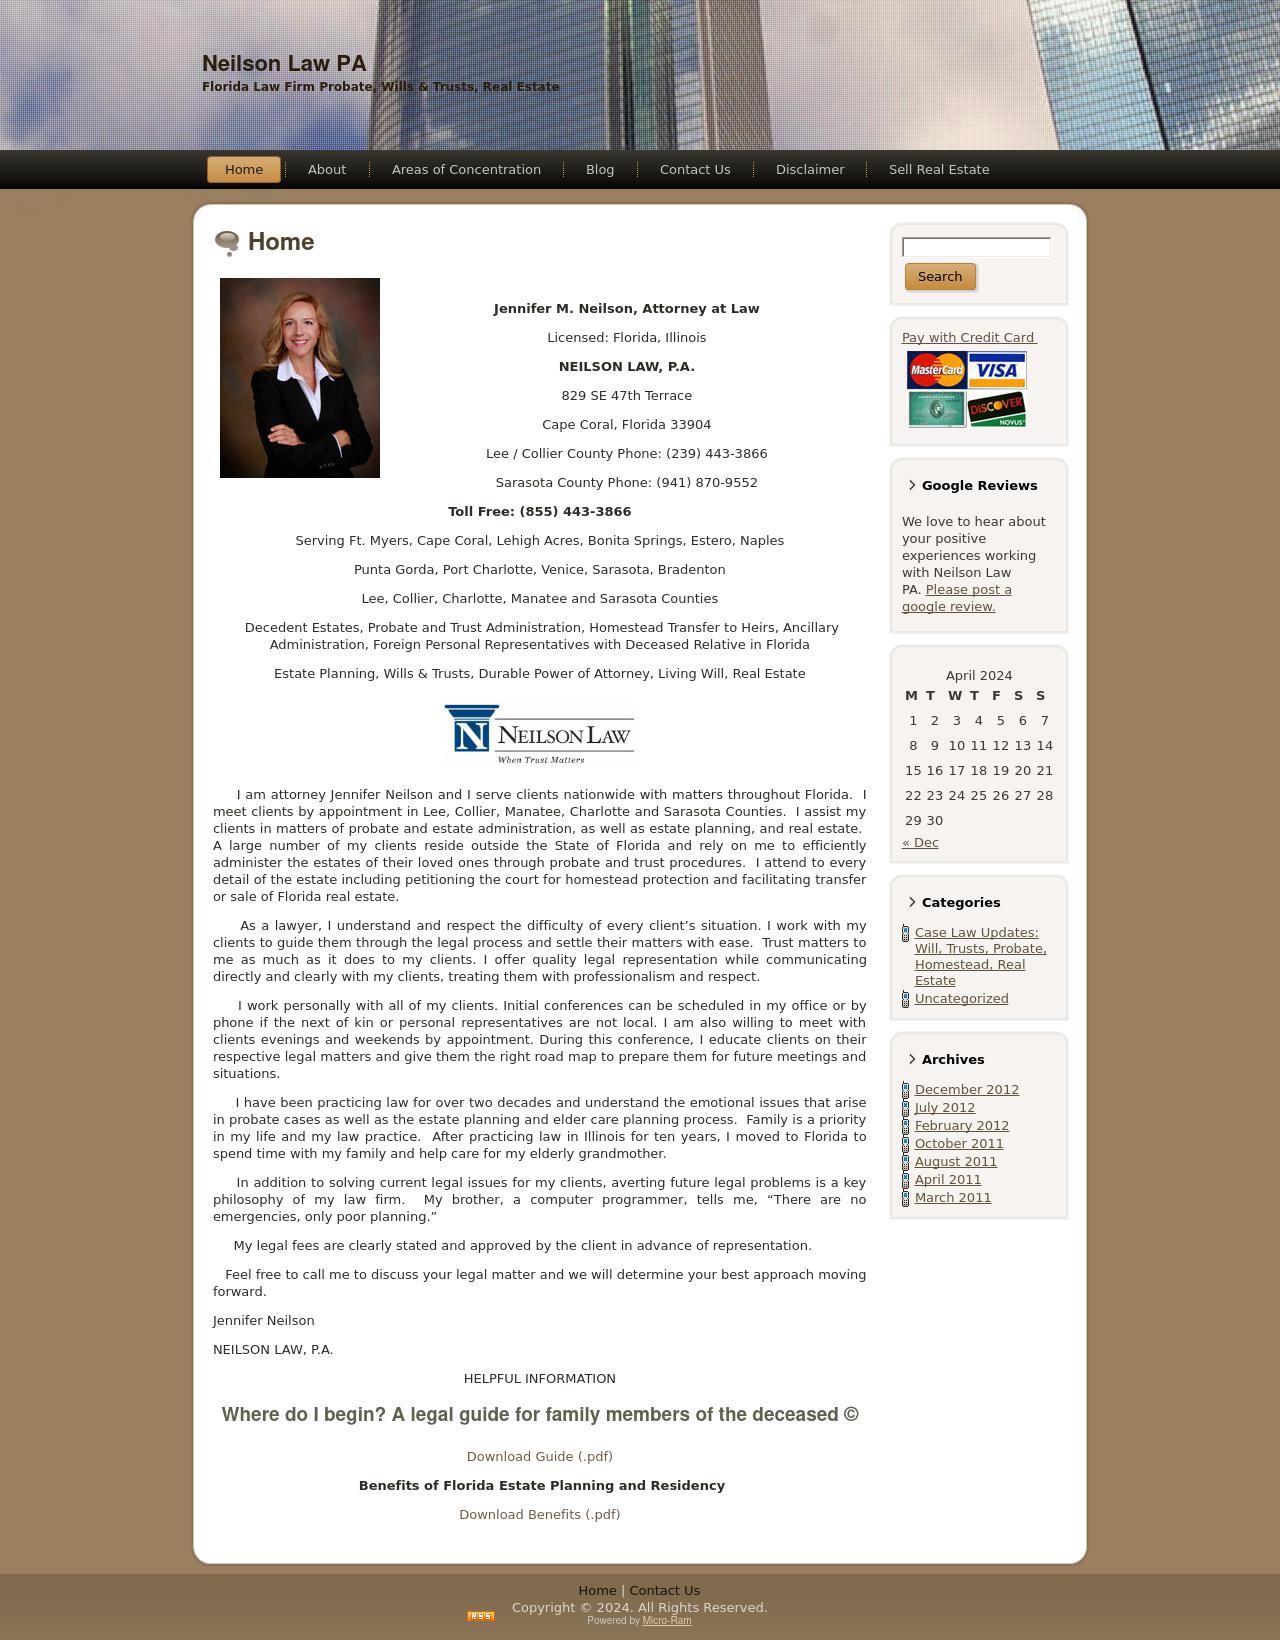 Neilson Law, P.A. - Probate, Trusts and Estates Law Firm - Sarasota FL Lawyers